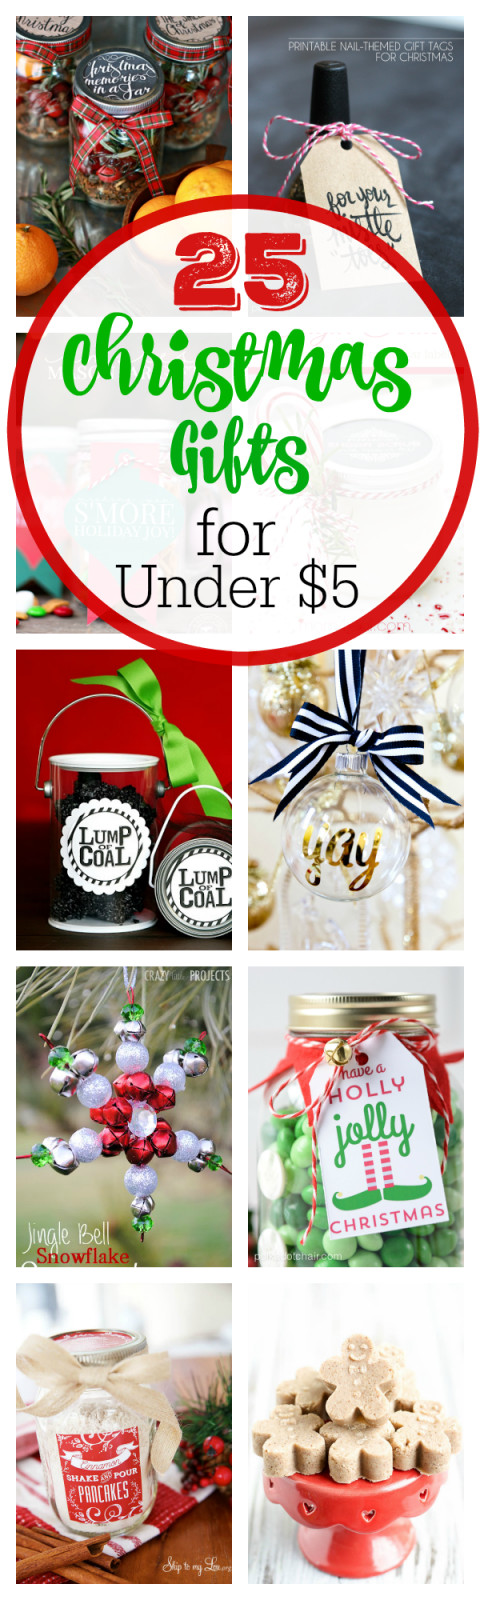 Christmas Gift Ideas Under $5
 25 Christmas Gift Ideas for Under $5